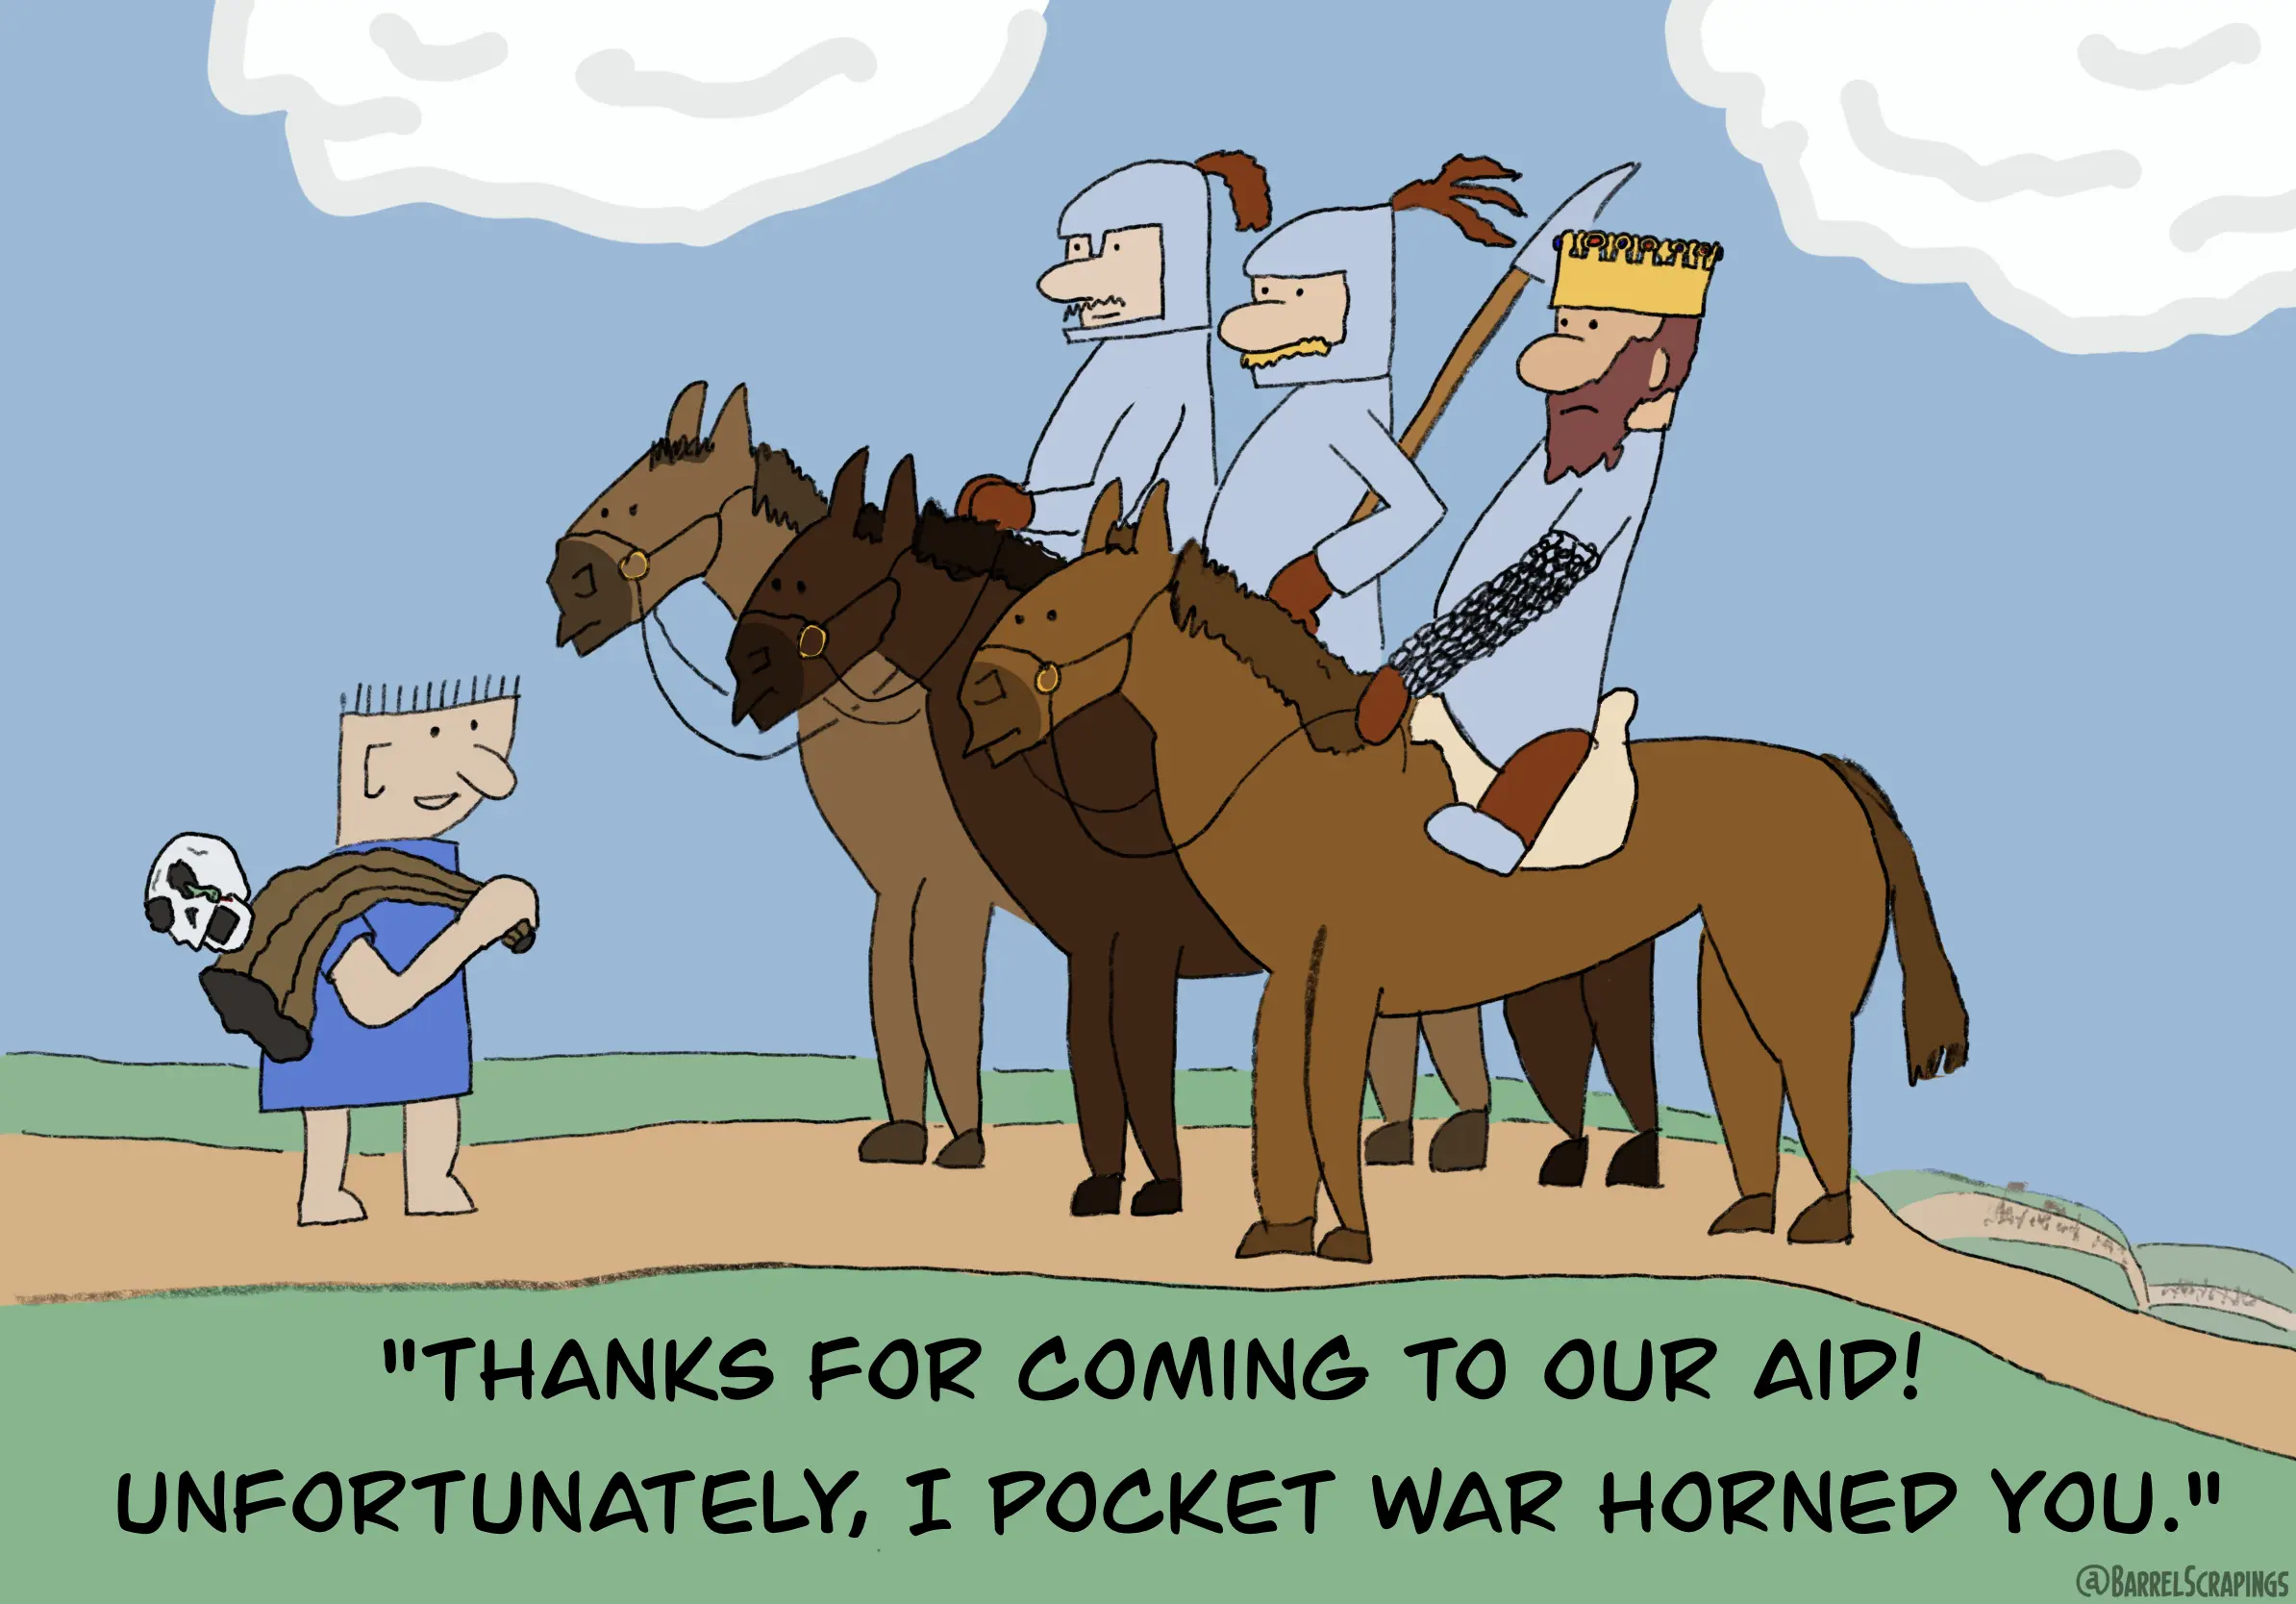 Three riders on horseback, including a king, approach a peasant. The peasant has a horn slung over his shoulder, with a skull on top, and a snake coming out of the eye socket. The peasant says "Thanks for coming to our aid! Unfortunately, I pocket war horned you"